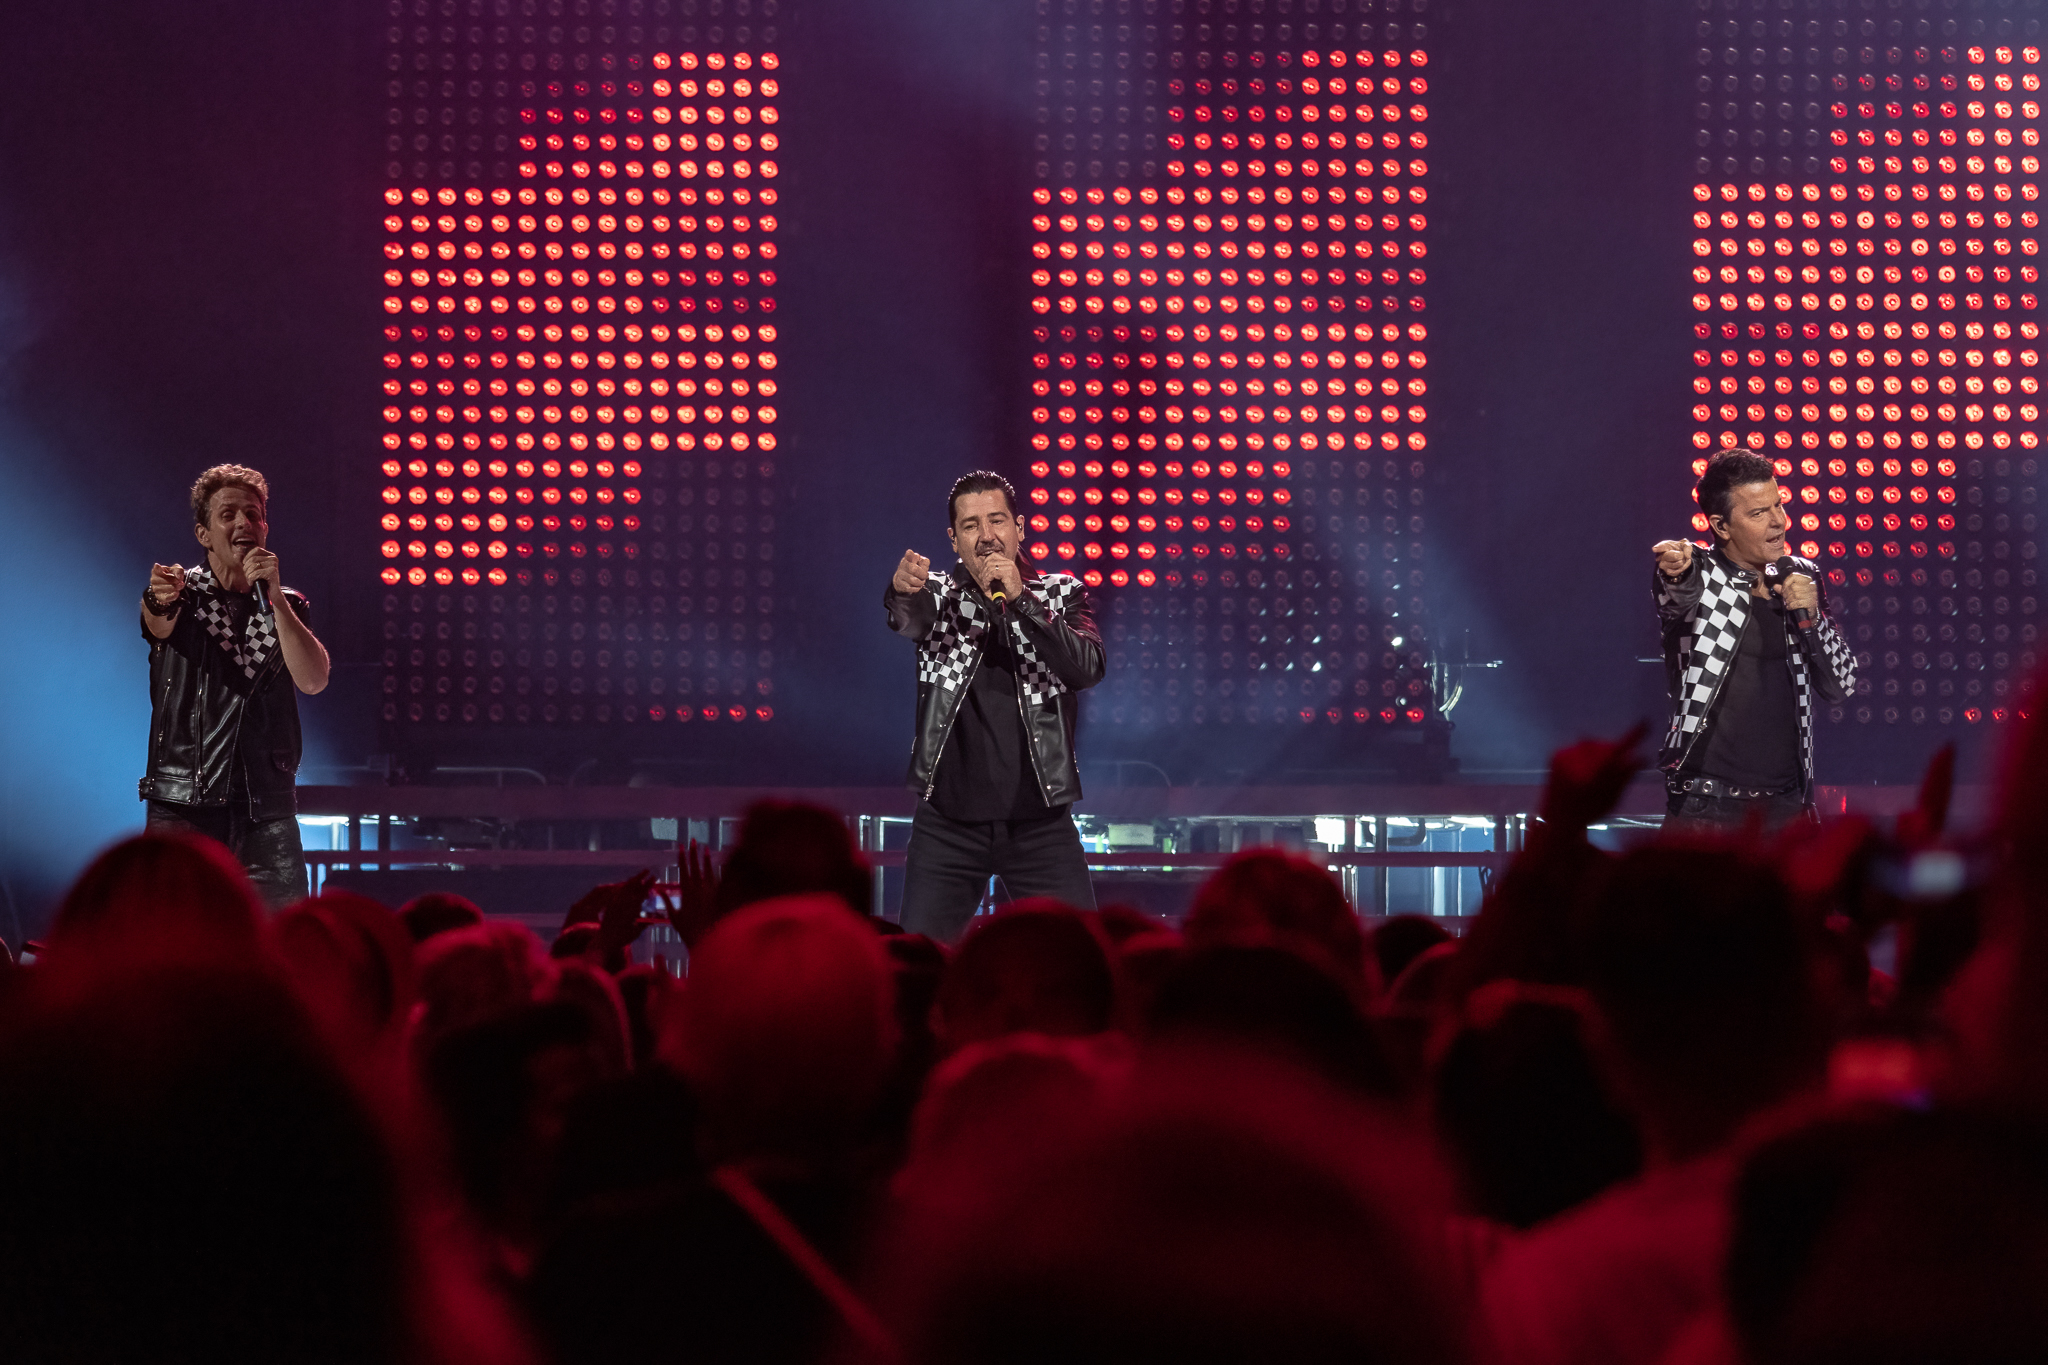 New Kids on the Block perform at Moda Center in Portland, OR on June 5, 2022.